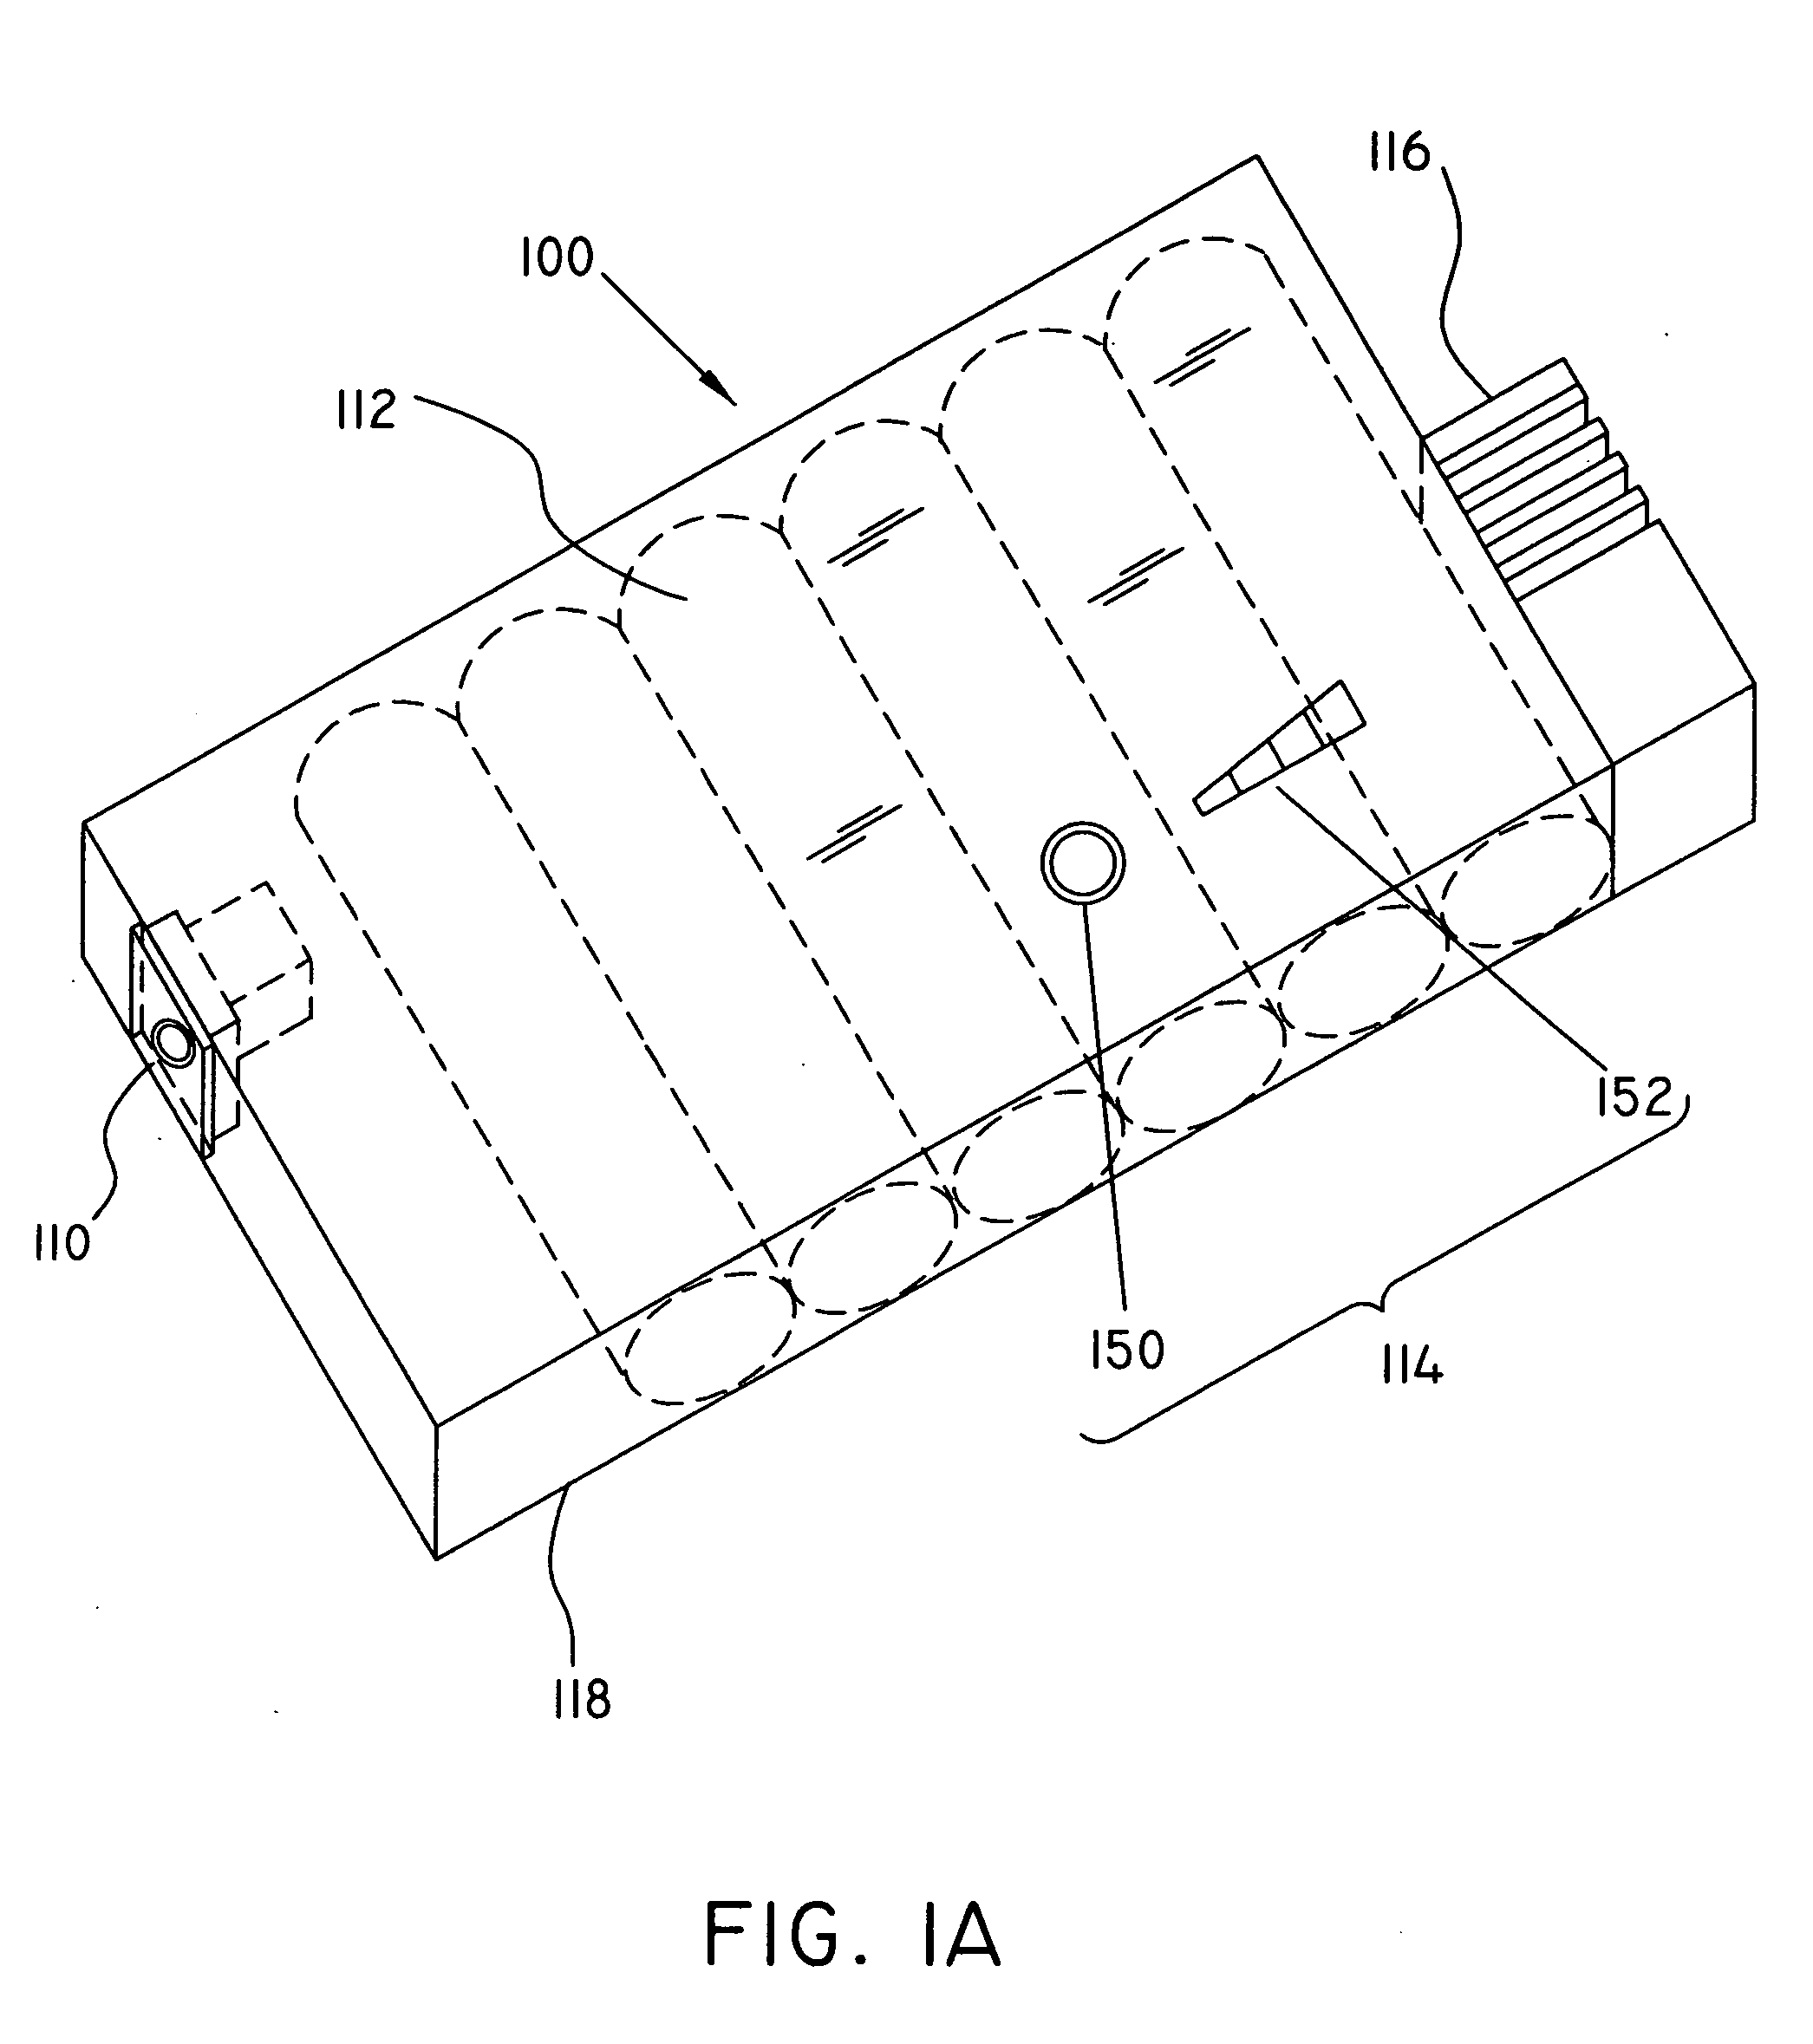 Replacement battery pack with built-in charging circuitry and power connector, and AC adapter for reading charging status of replacement battery pack